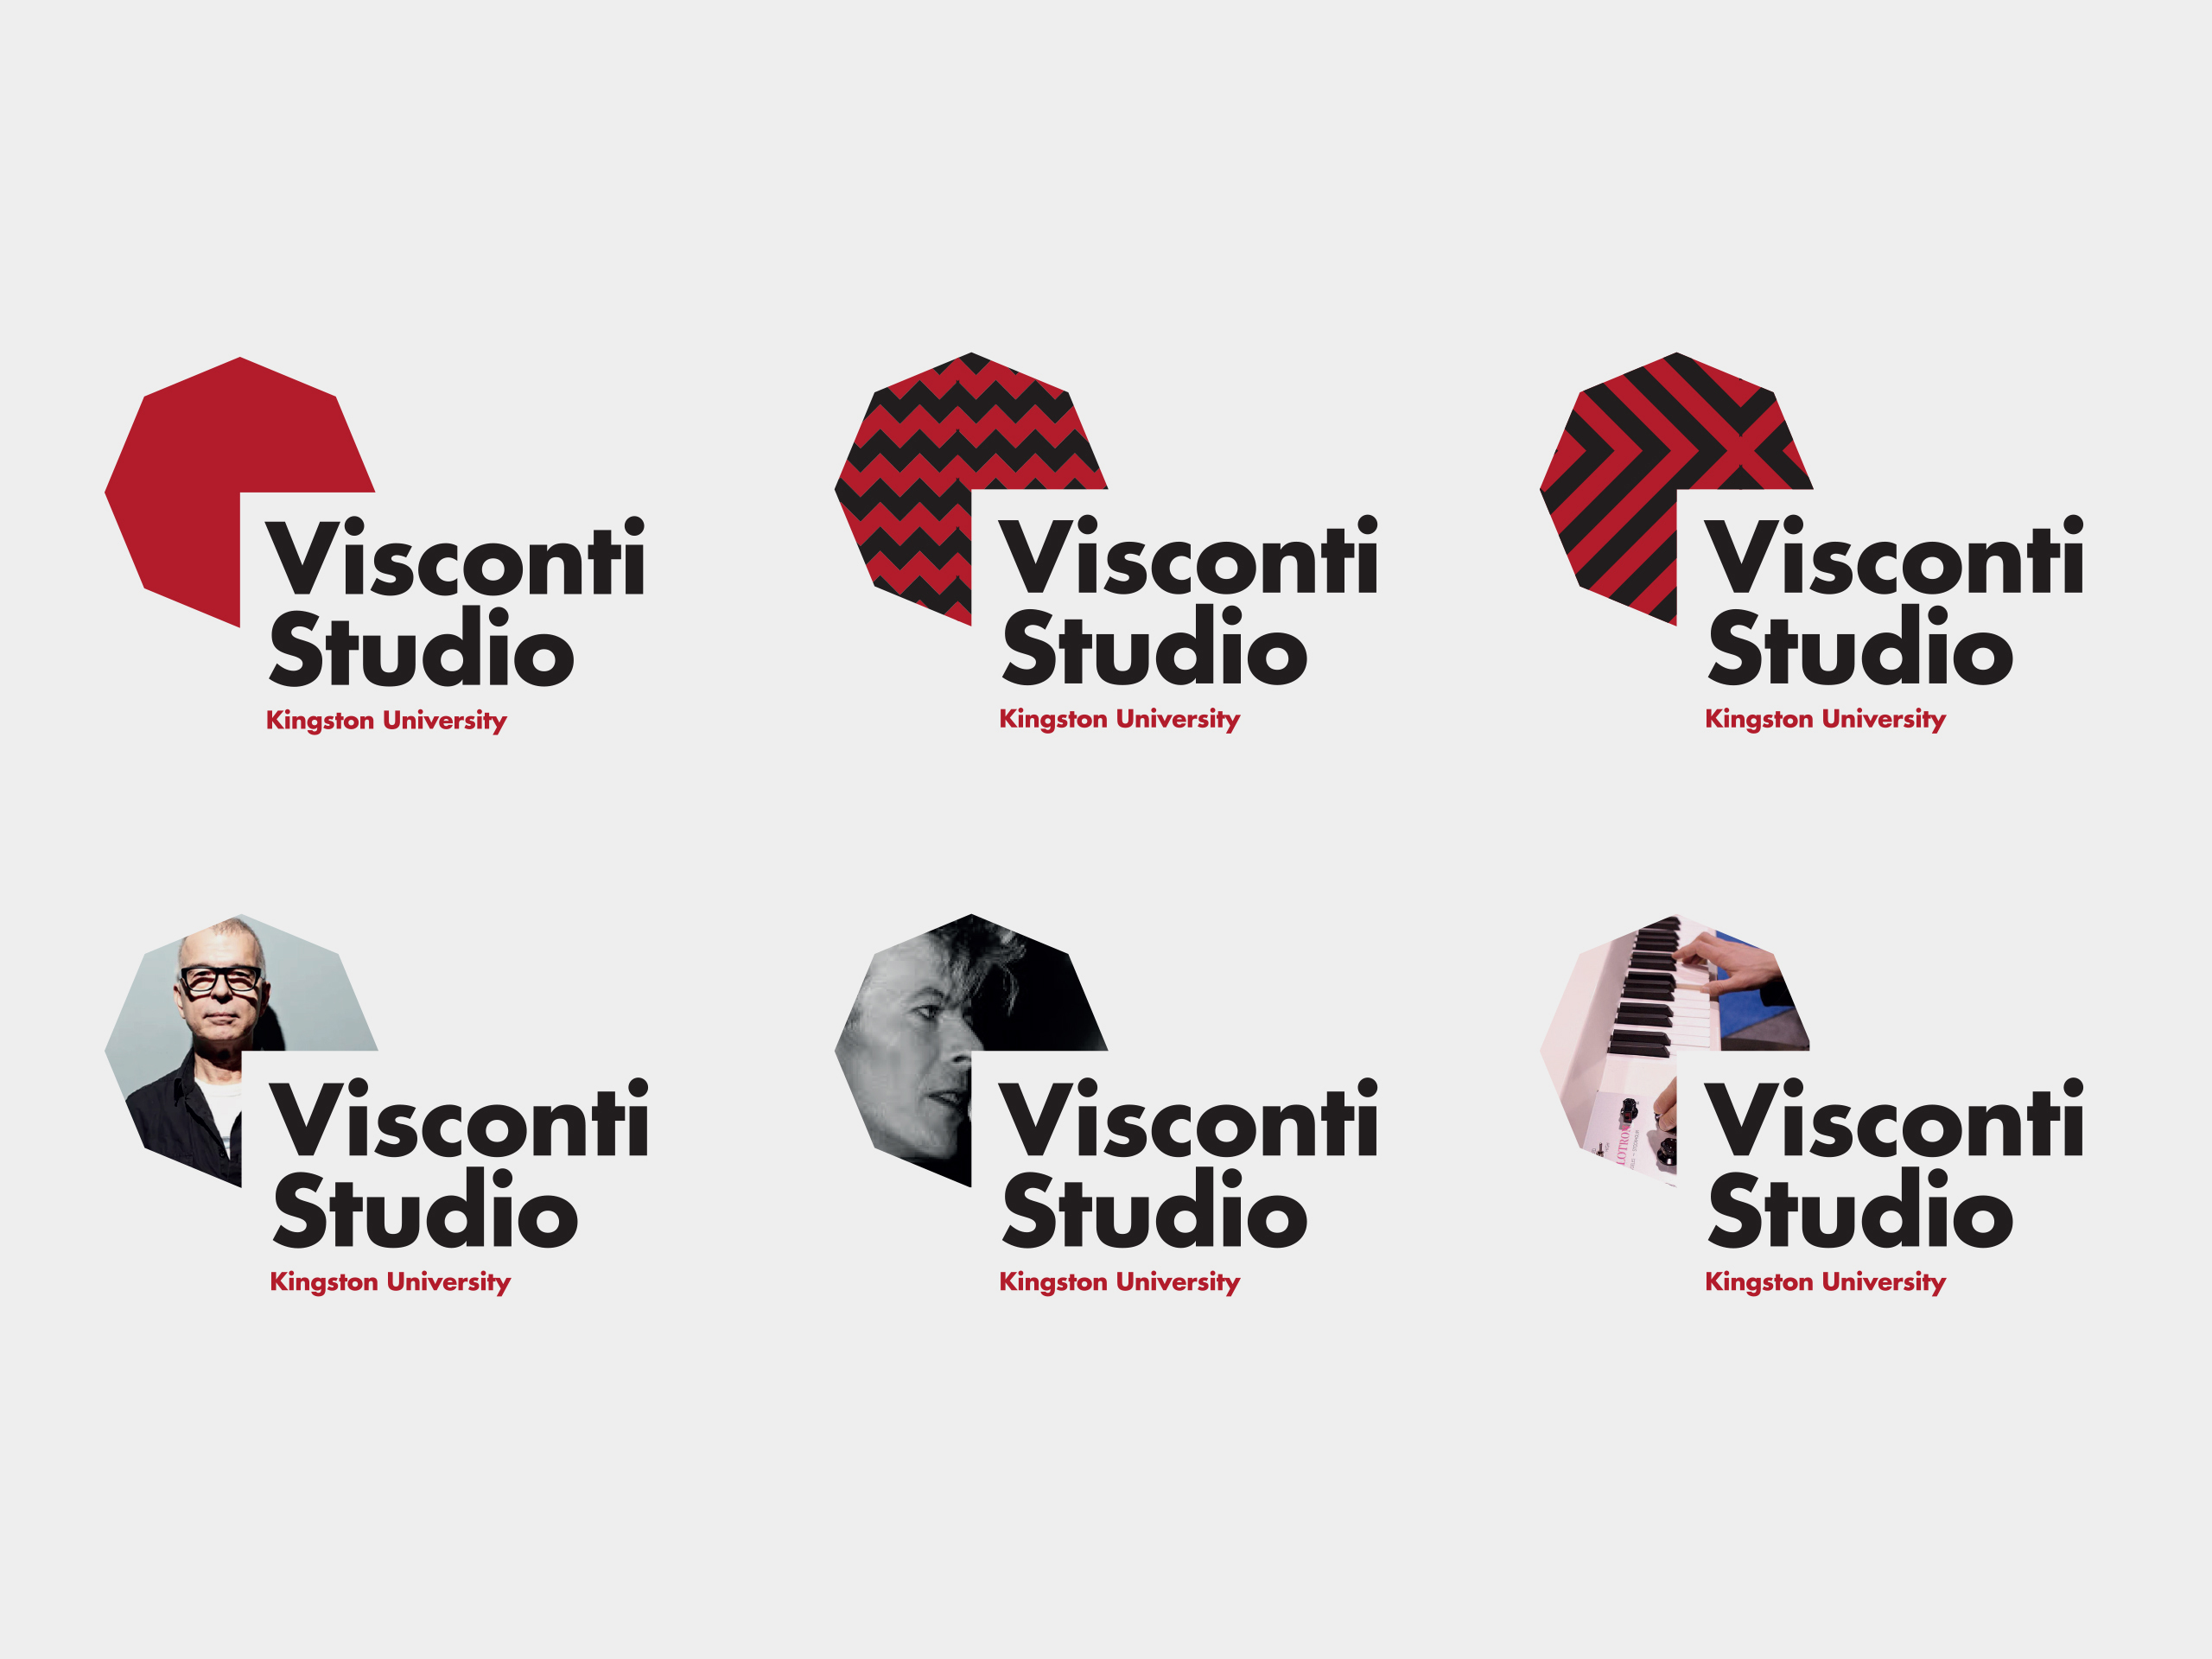 An image to show the different logo lockups; all logos are octagonal in shape but with different imagery within, alongside the Visconti Studio name.